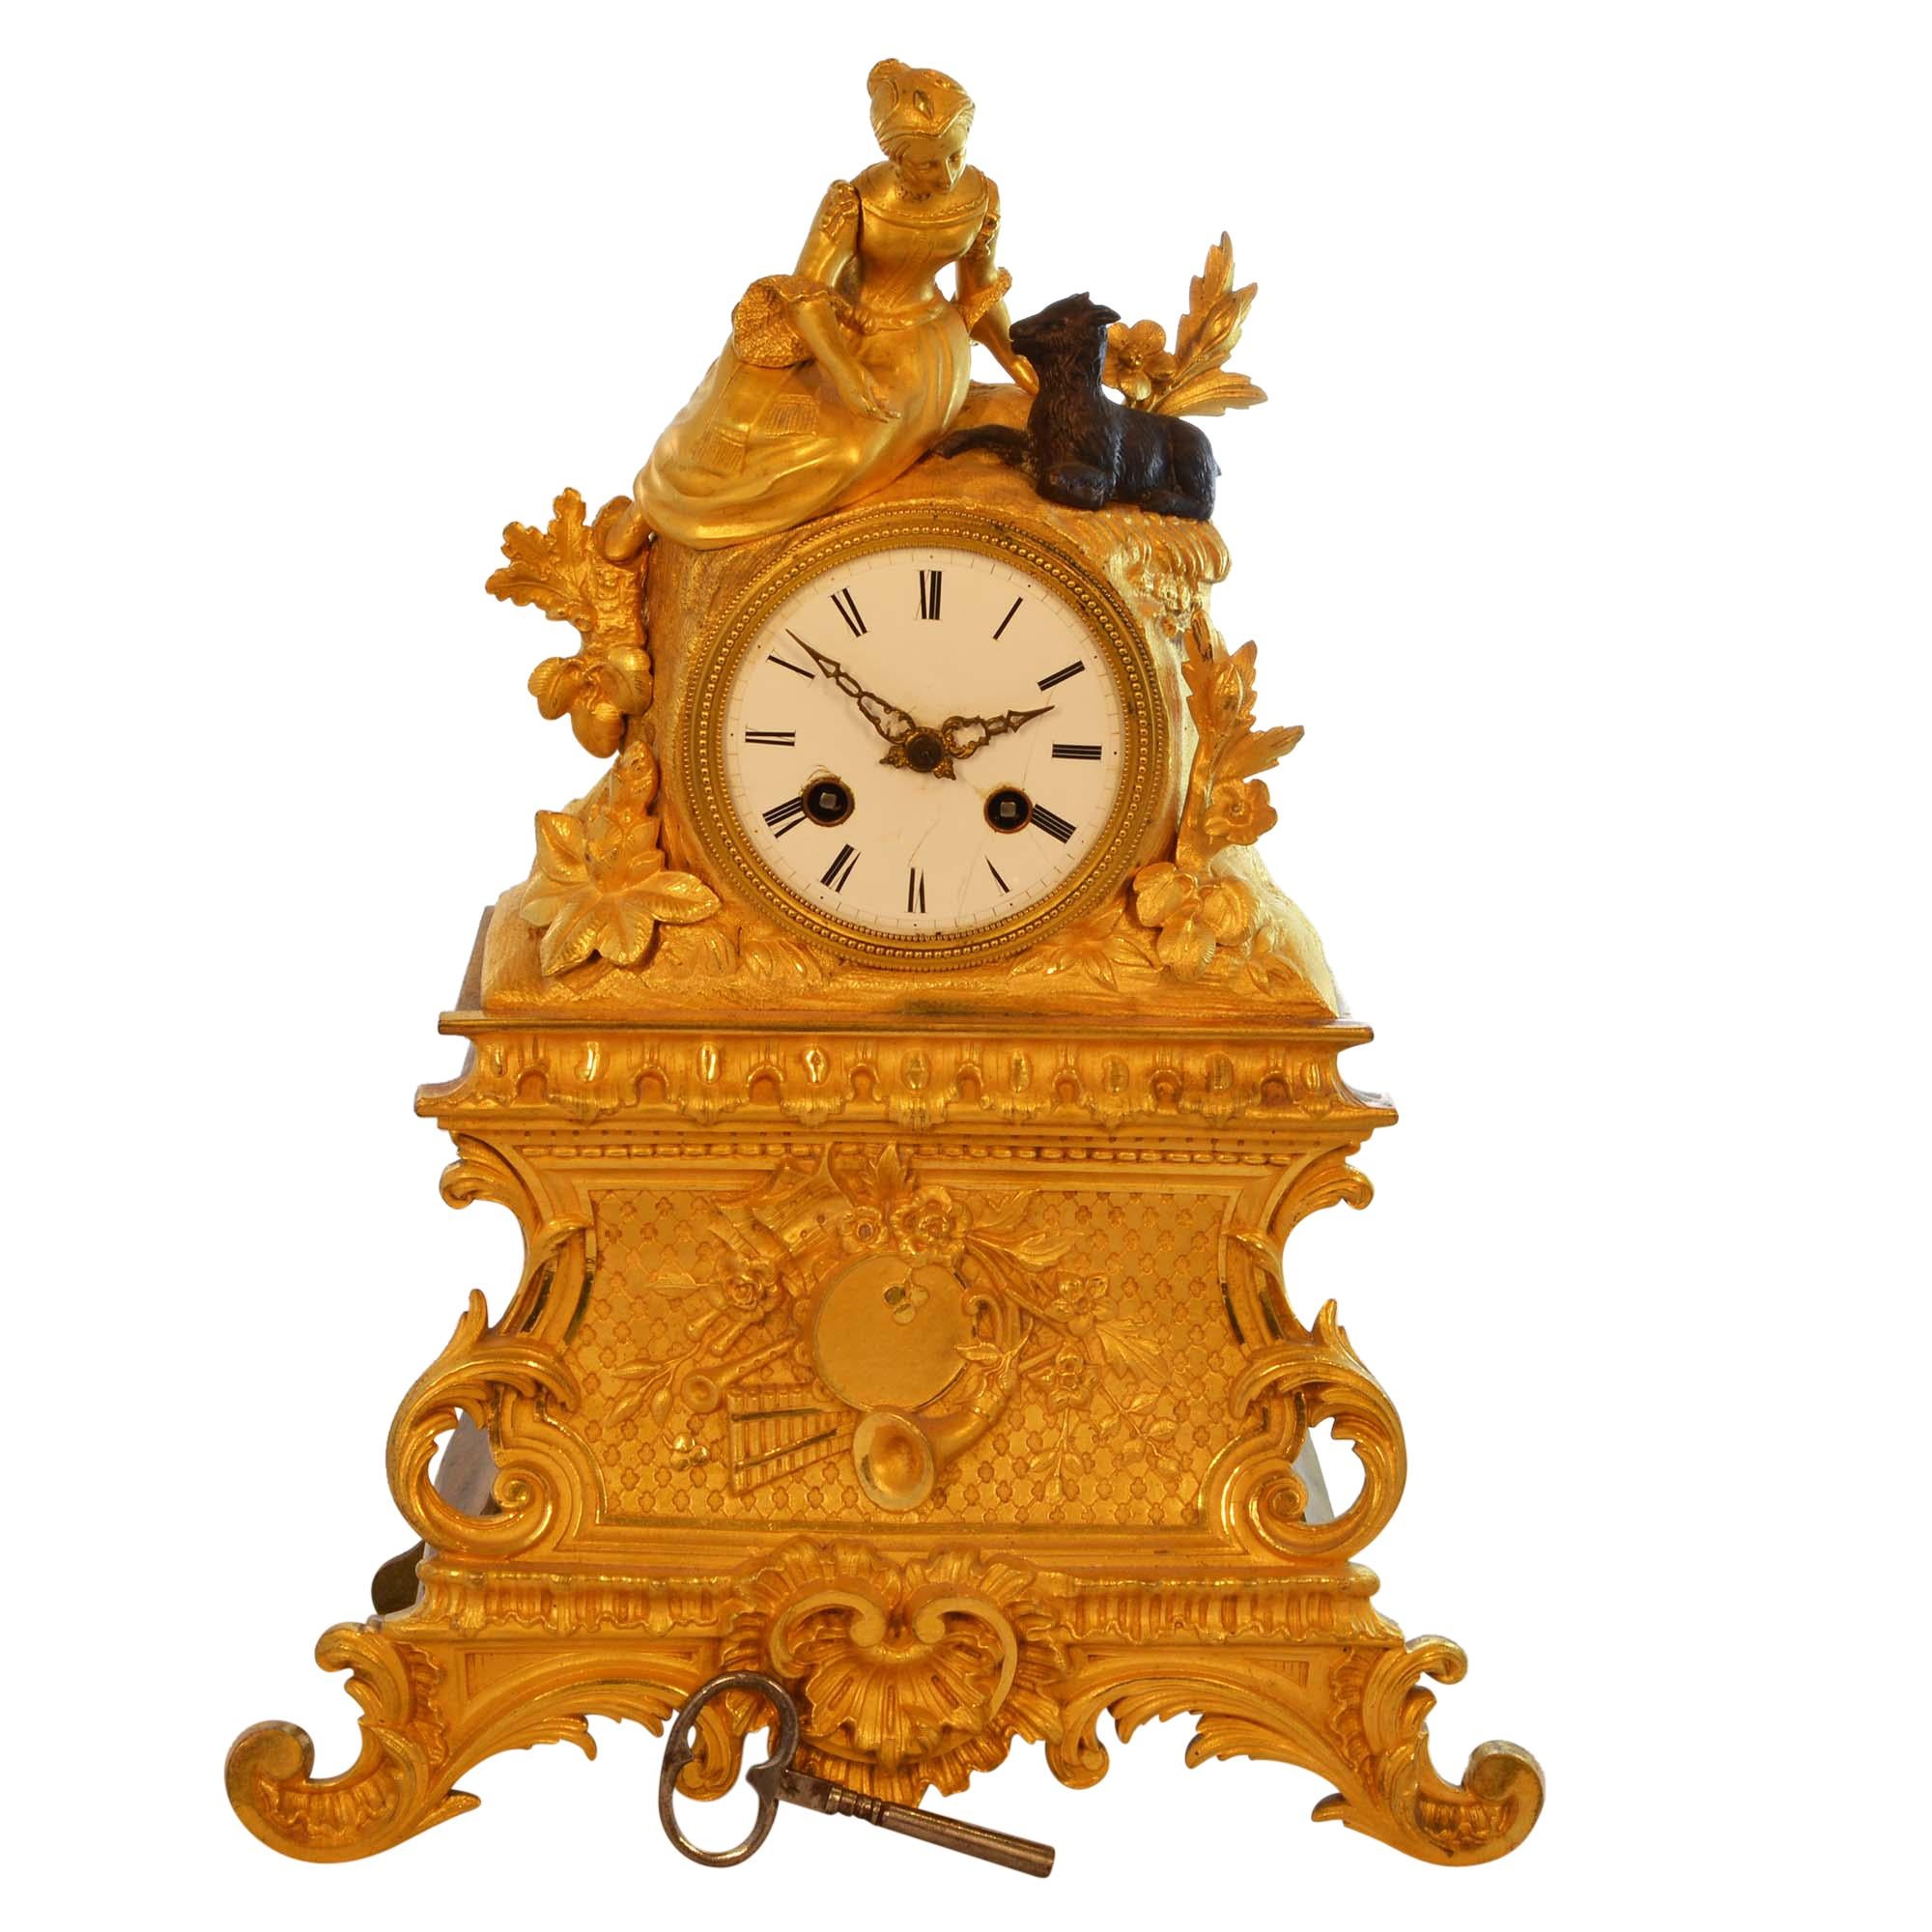 Antique 19th Century Gilded Mantle Desk Clock with Girl and Goat For Sale